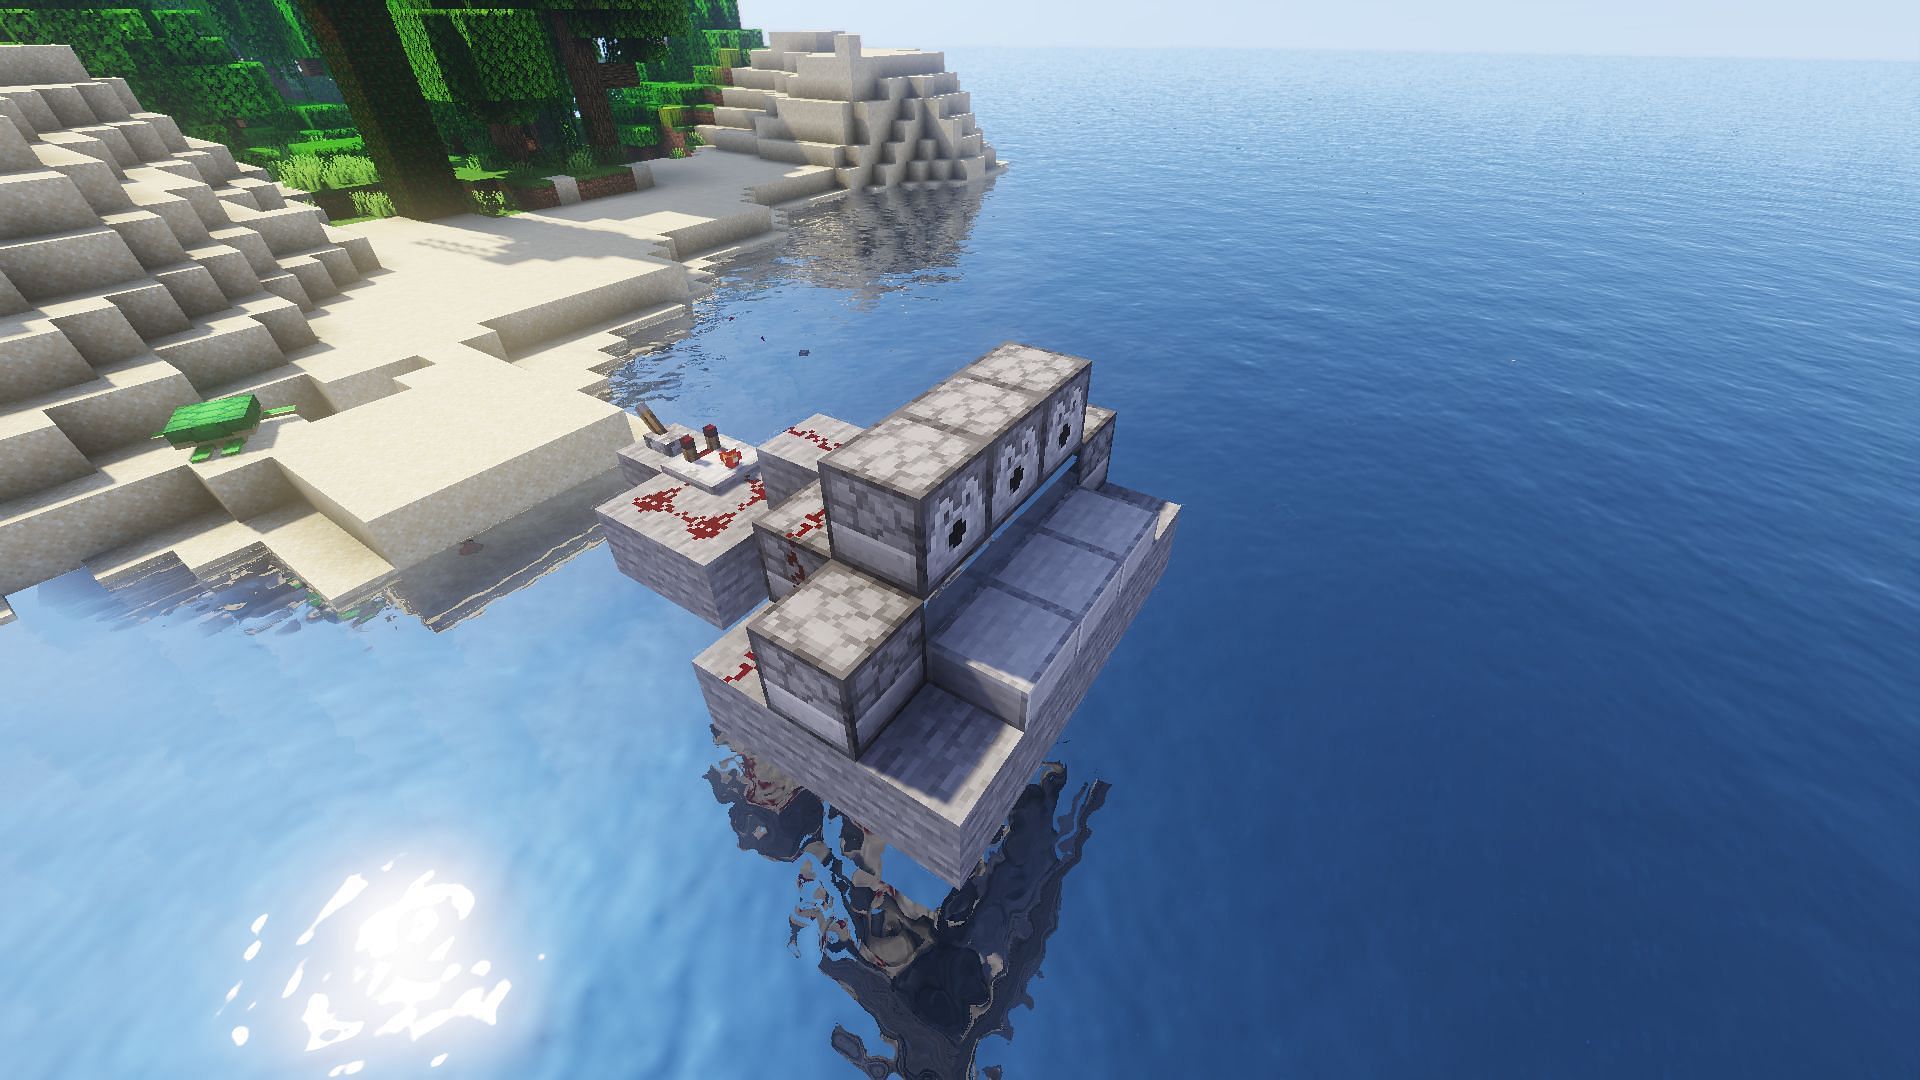 The Carpet Cannon ready to fire (Image via Minecraft)